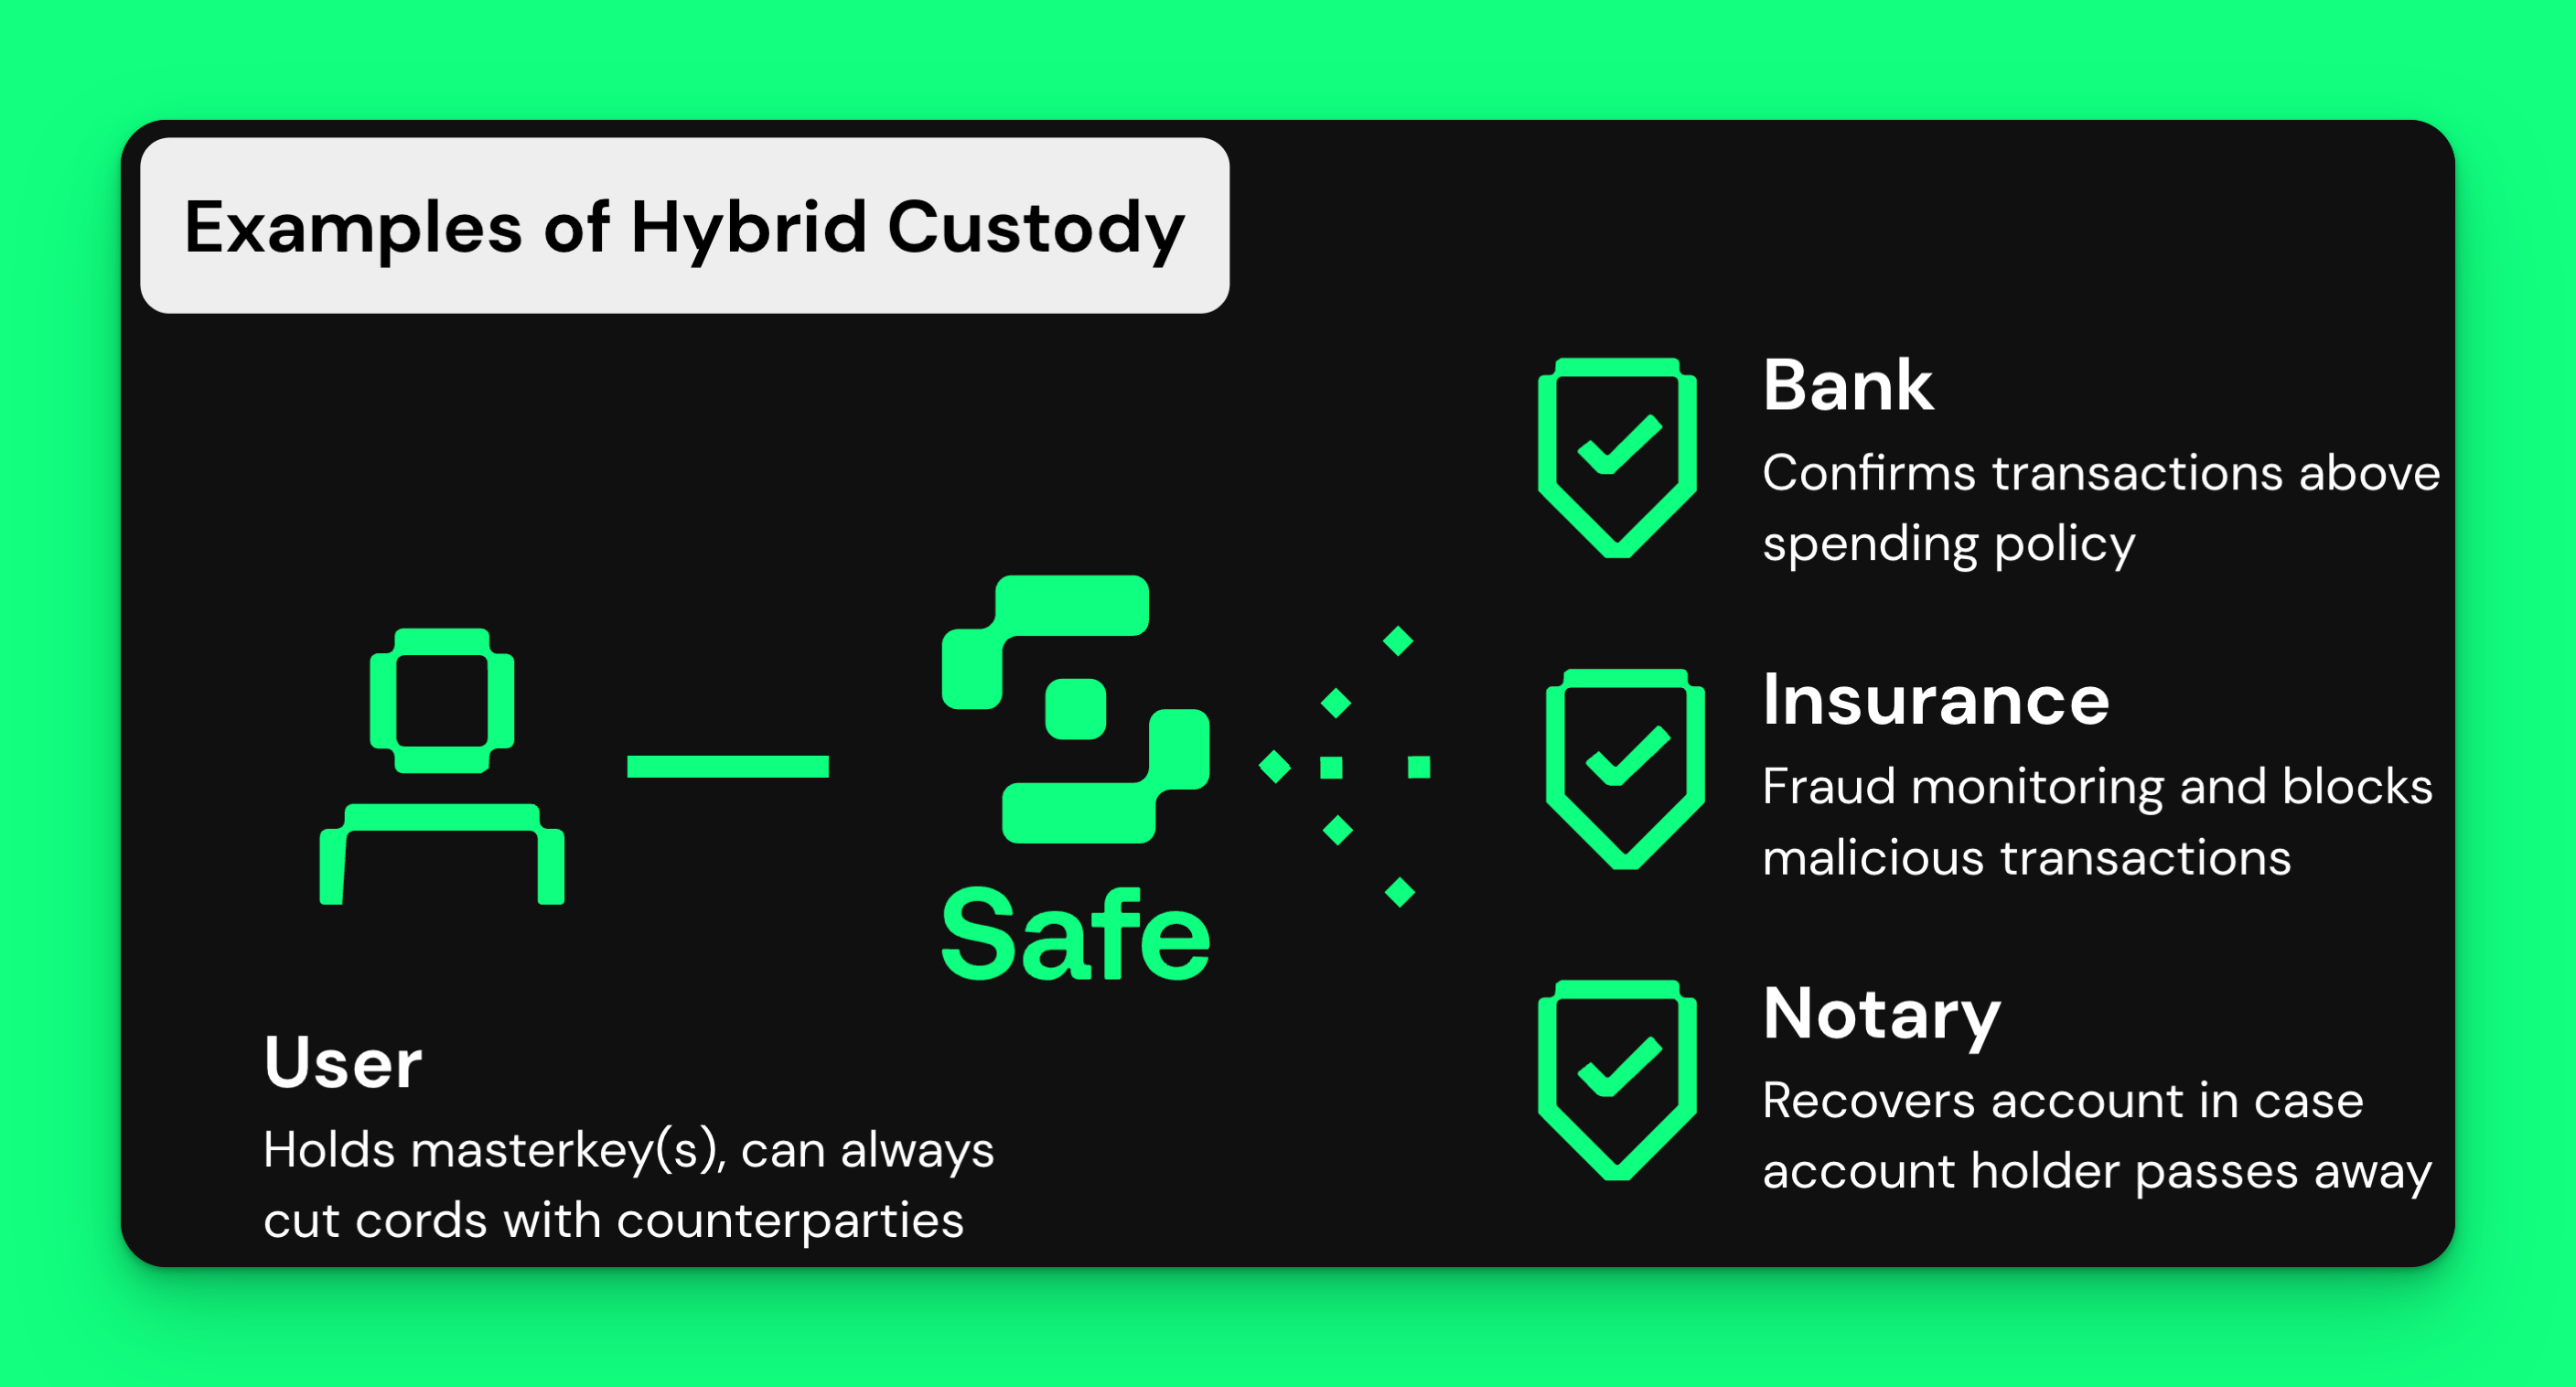 Hybrid custody is one of the features unlocked by account abstraction